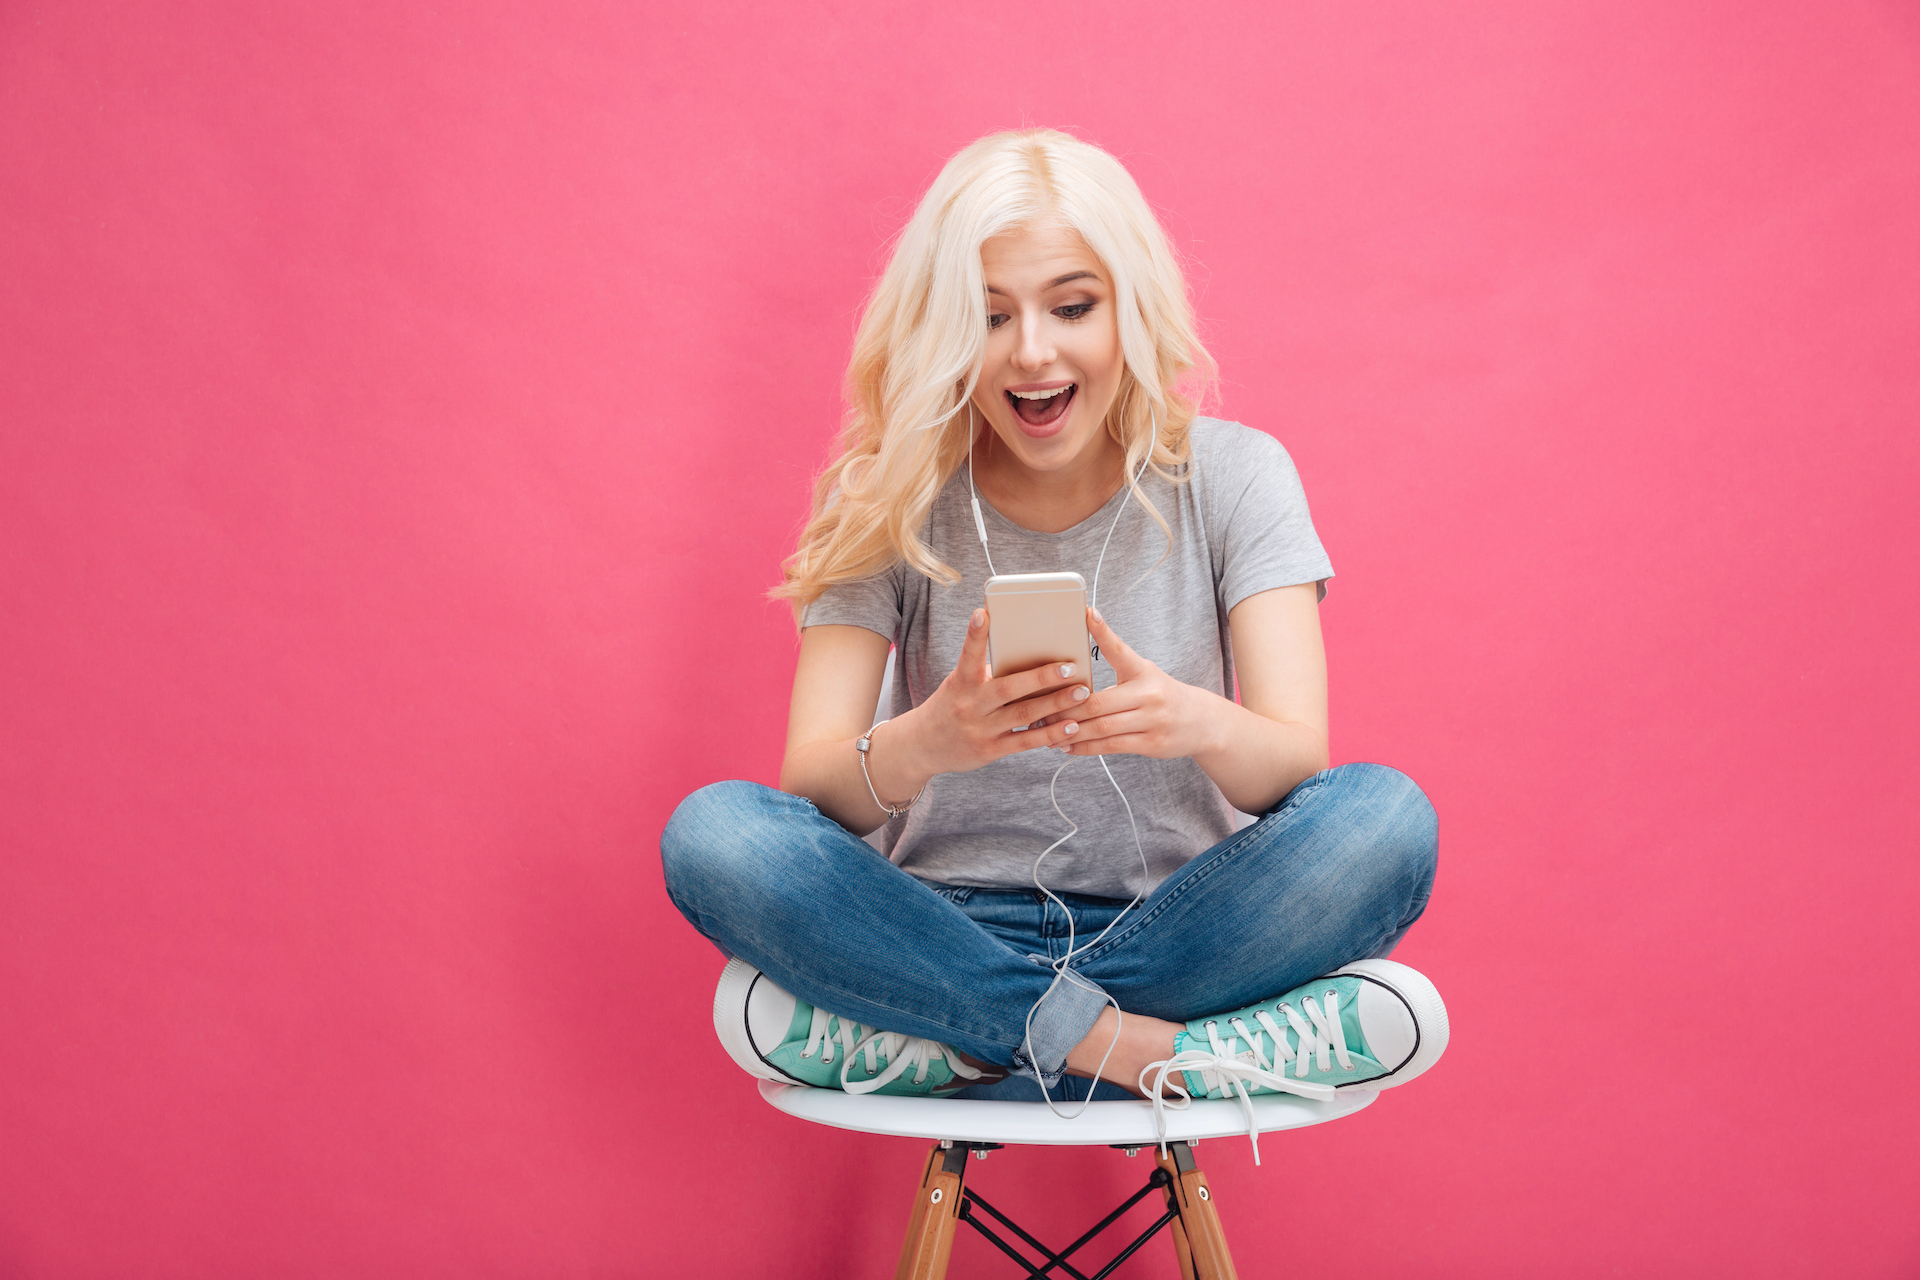 Cheerful young woman using smartphone with headphones over pink background - How We Generated 60,000 Facebook Likes (6 SIMPLE HACKS)